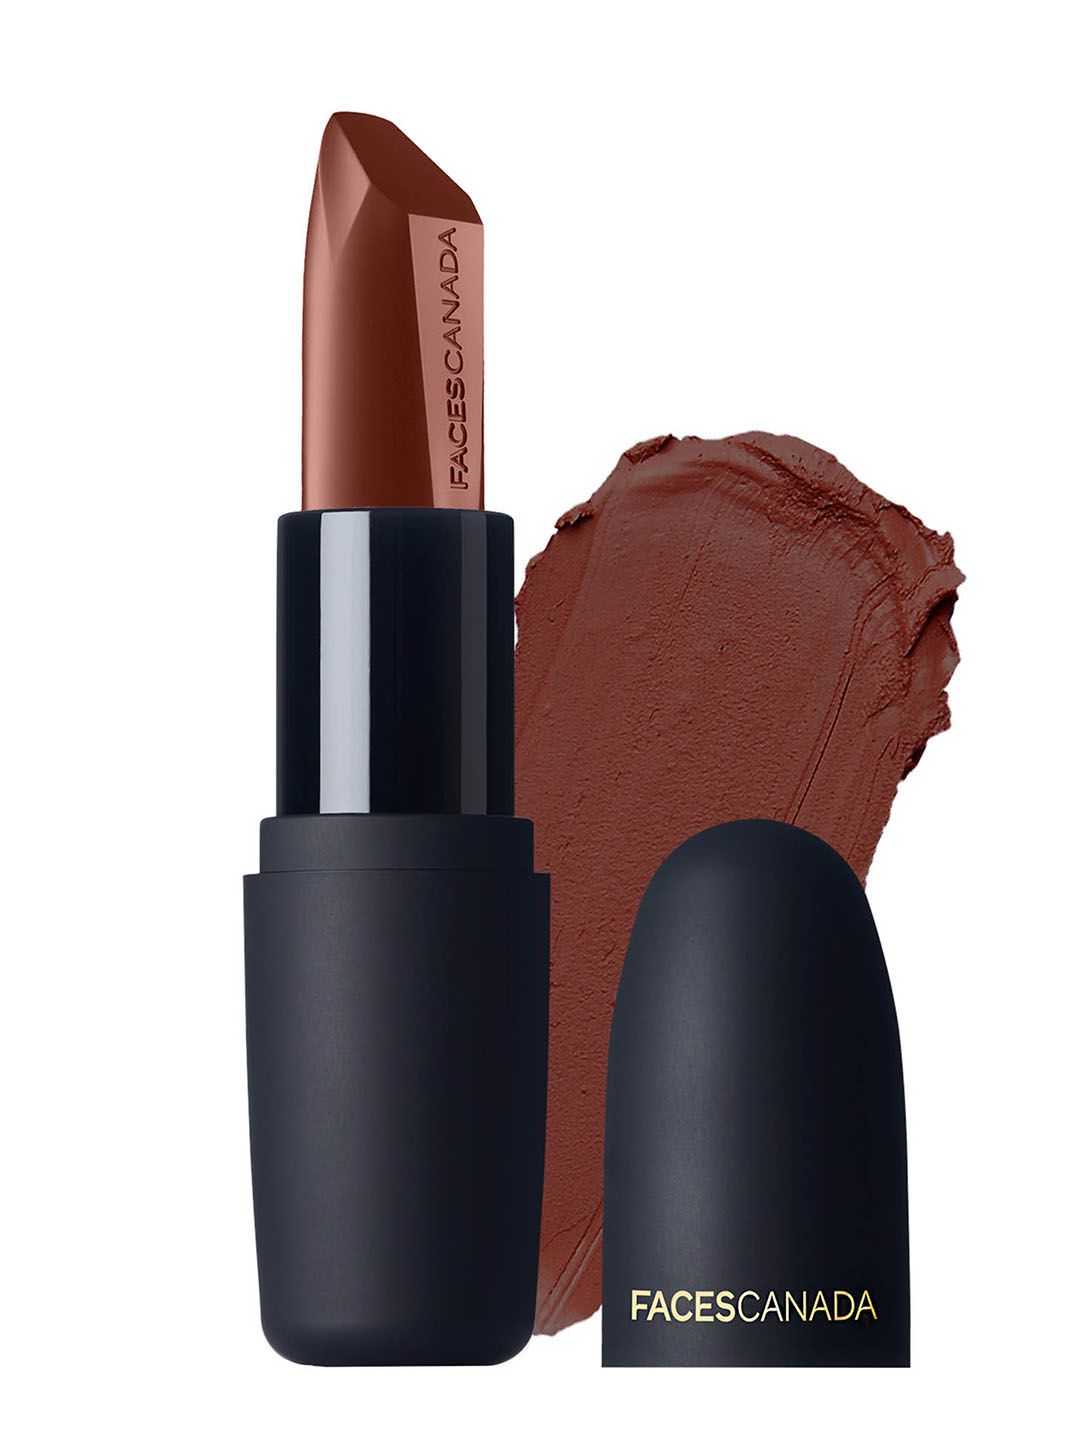 FACES CANADA Weightless Matte Finish Lipstick Forsake Beauty 01 4g Price in India